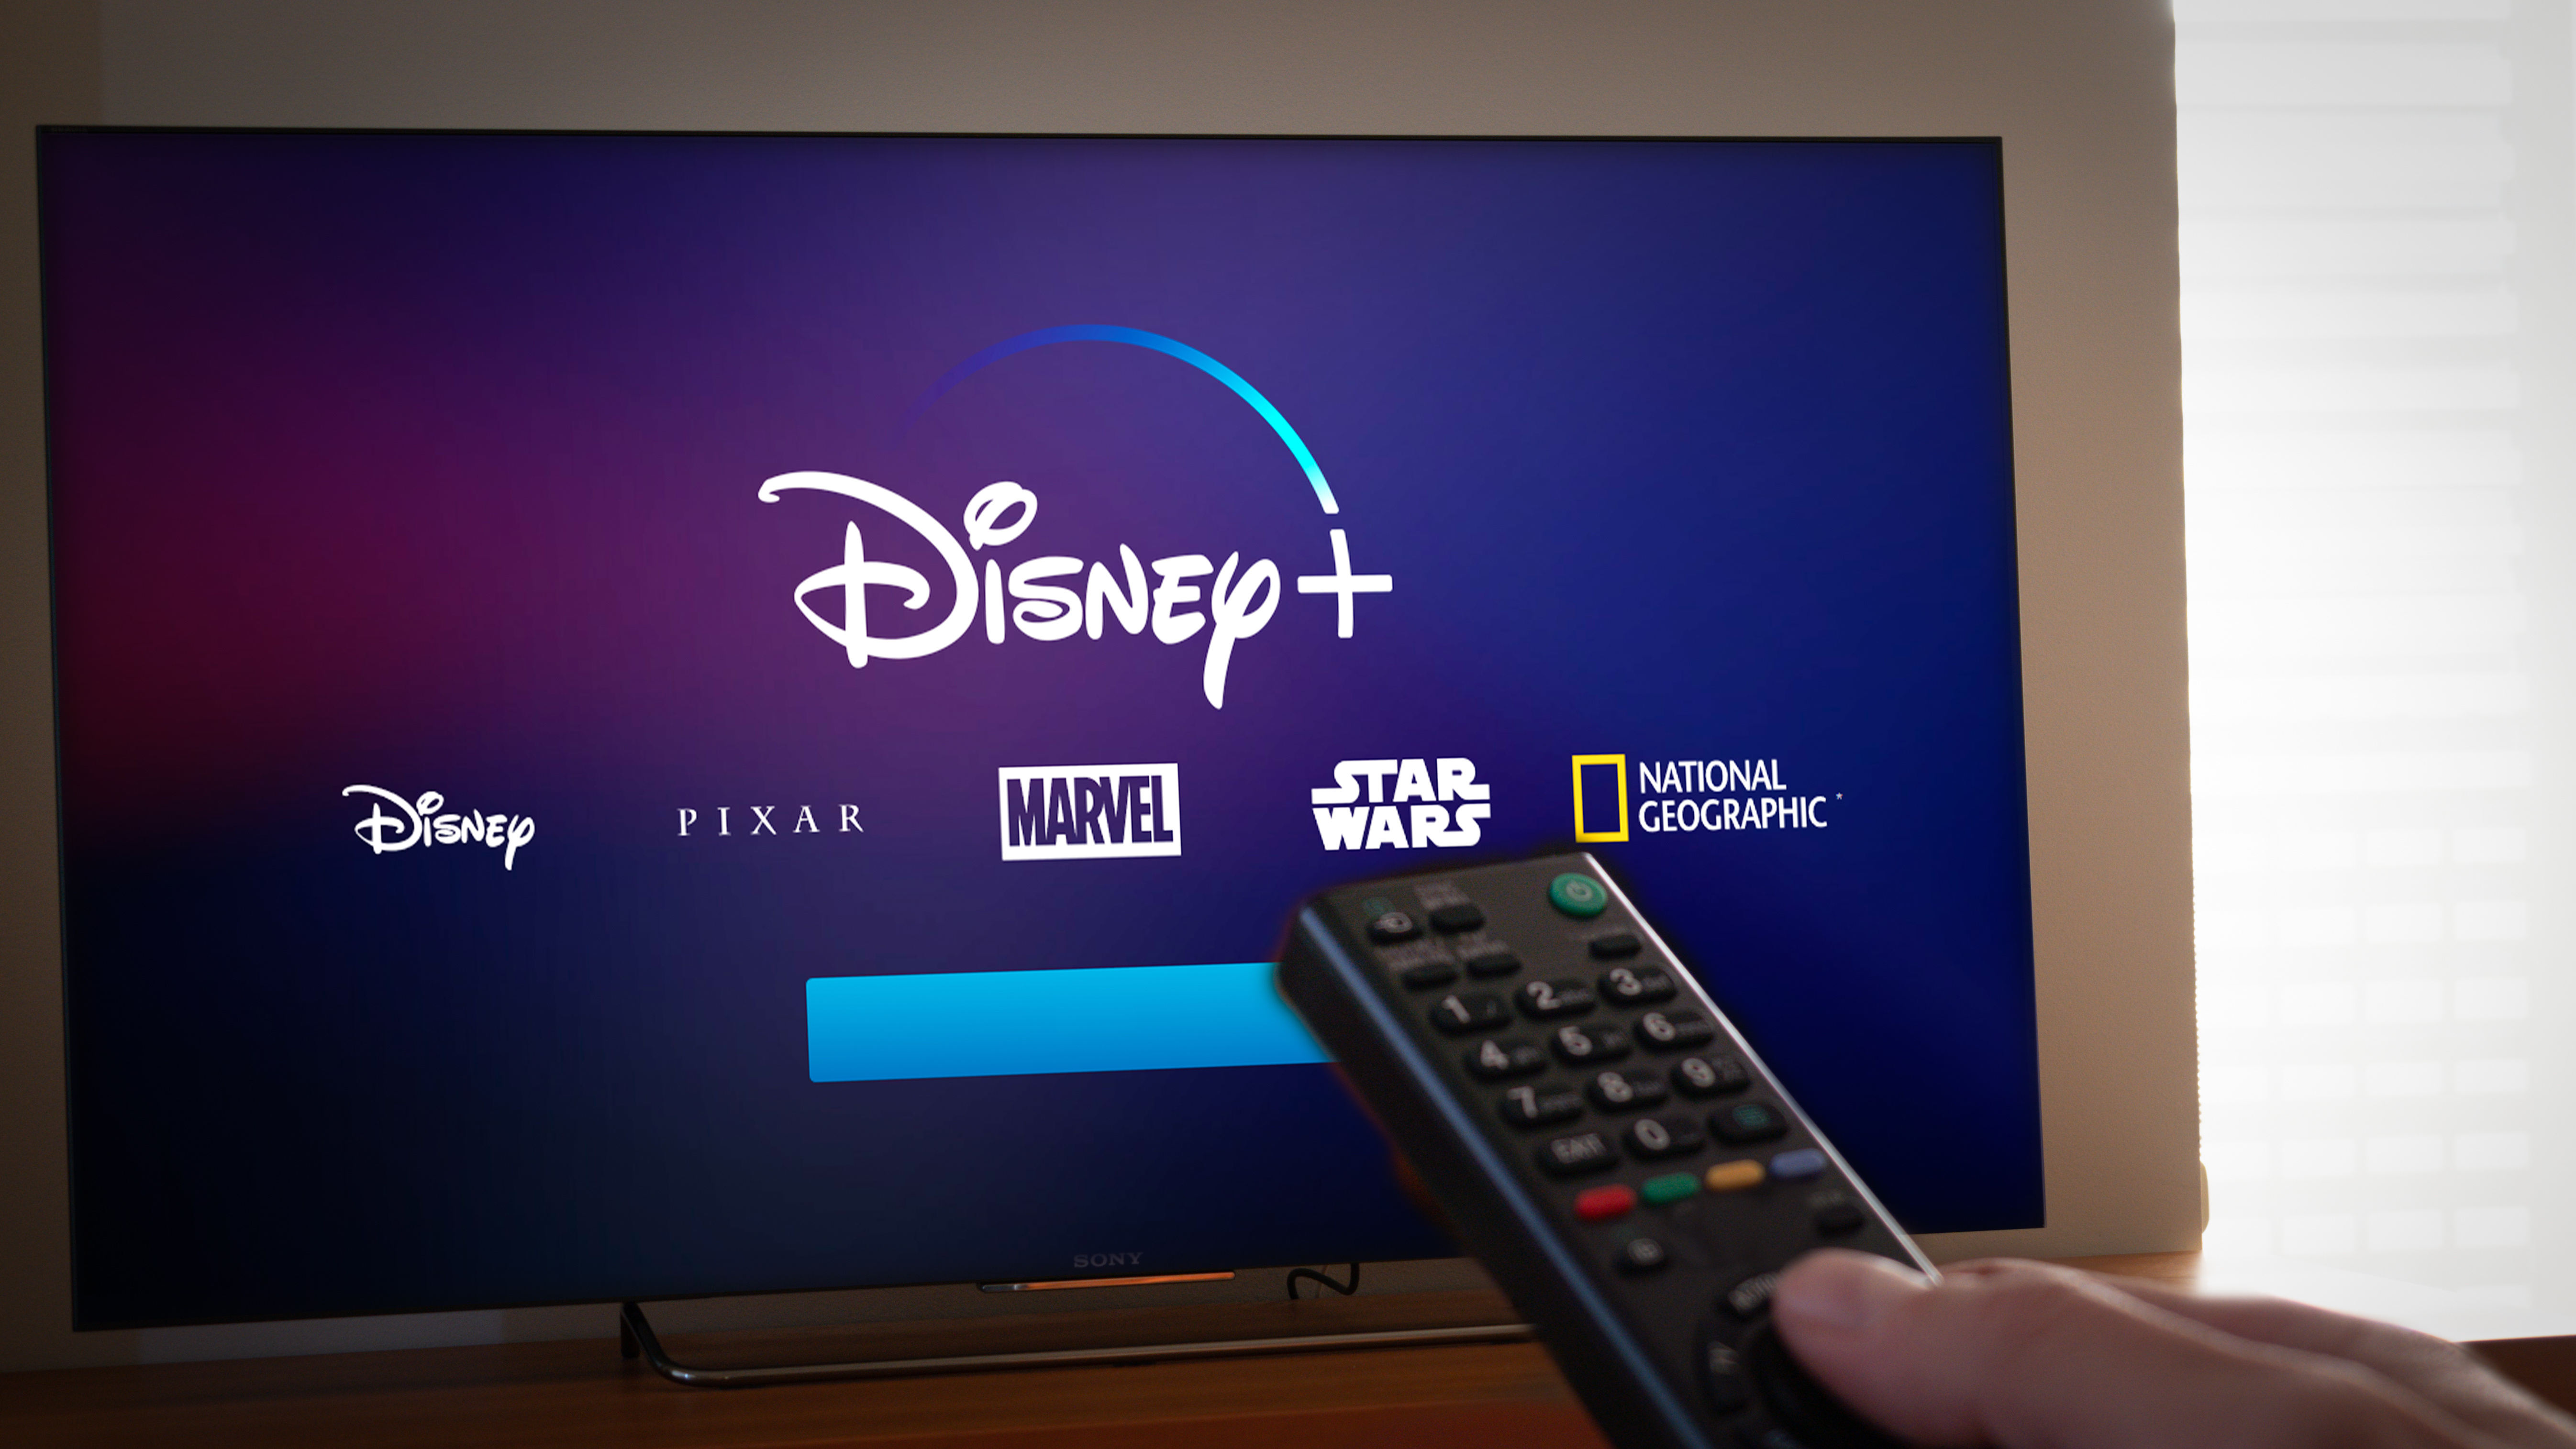 Disney Plus devices and Smart TVs: Here's what you can use